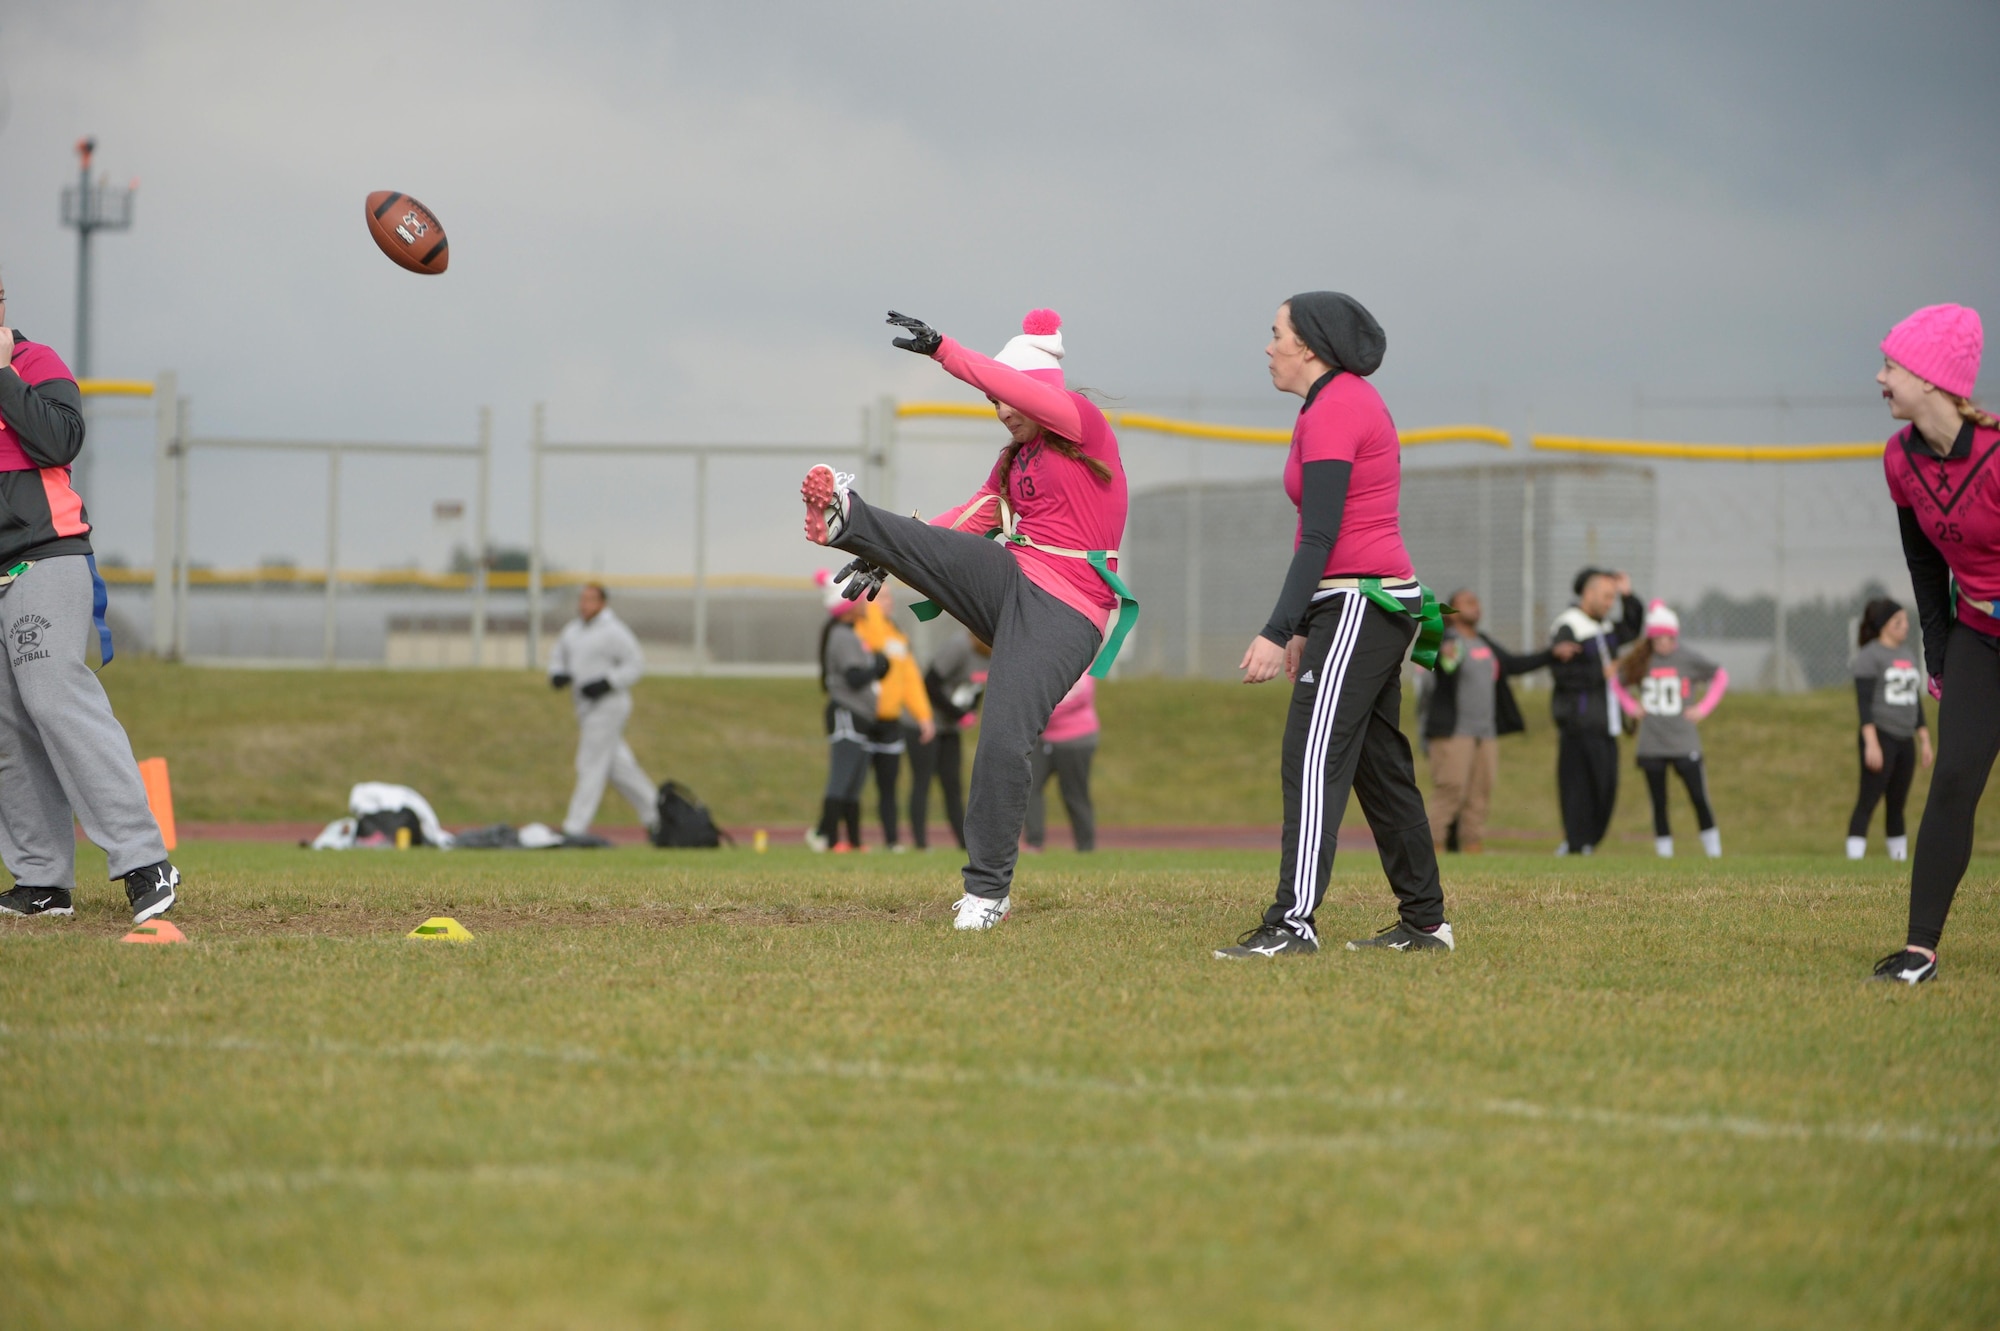 Airmen and family members from the 52nd Fighter Wing participated in a flag football game at the 2016 Combined Federal Campaign-Overseas kickoff Oct. 15, 2016, at Spangdahlem Air Base, Germany. The campaign offers people an opportunity to donate money to more than 2,600 national, international and public philanthropic organizations. (U.S. Air Force photo by Staff Sgt. Jonathan Snyder)